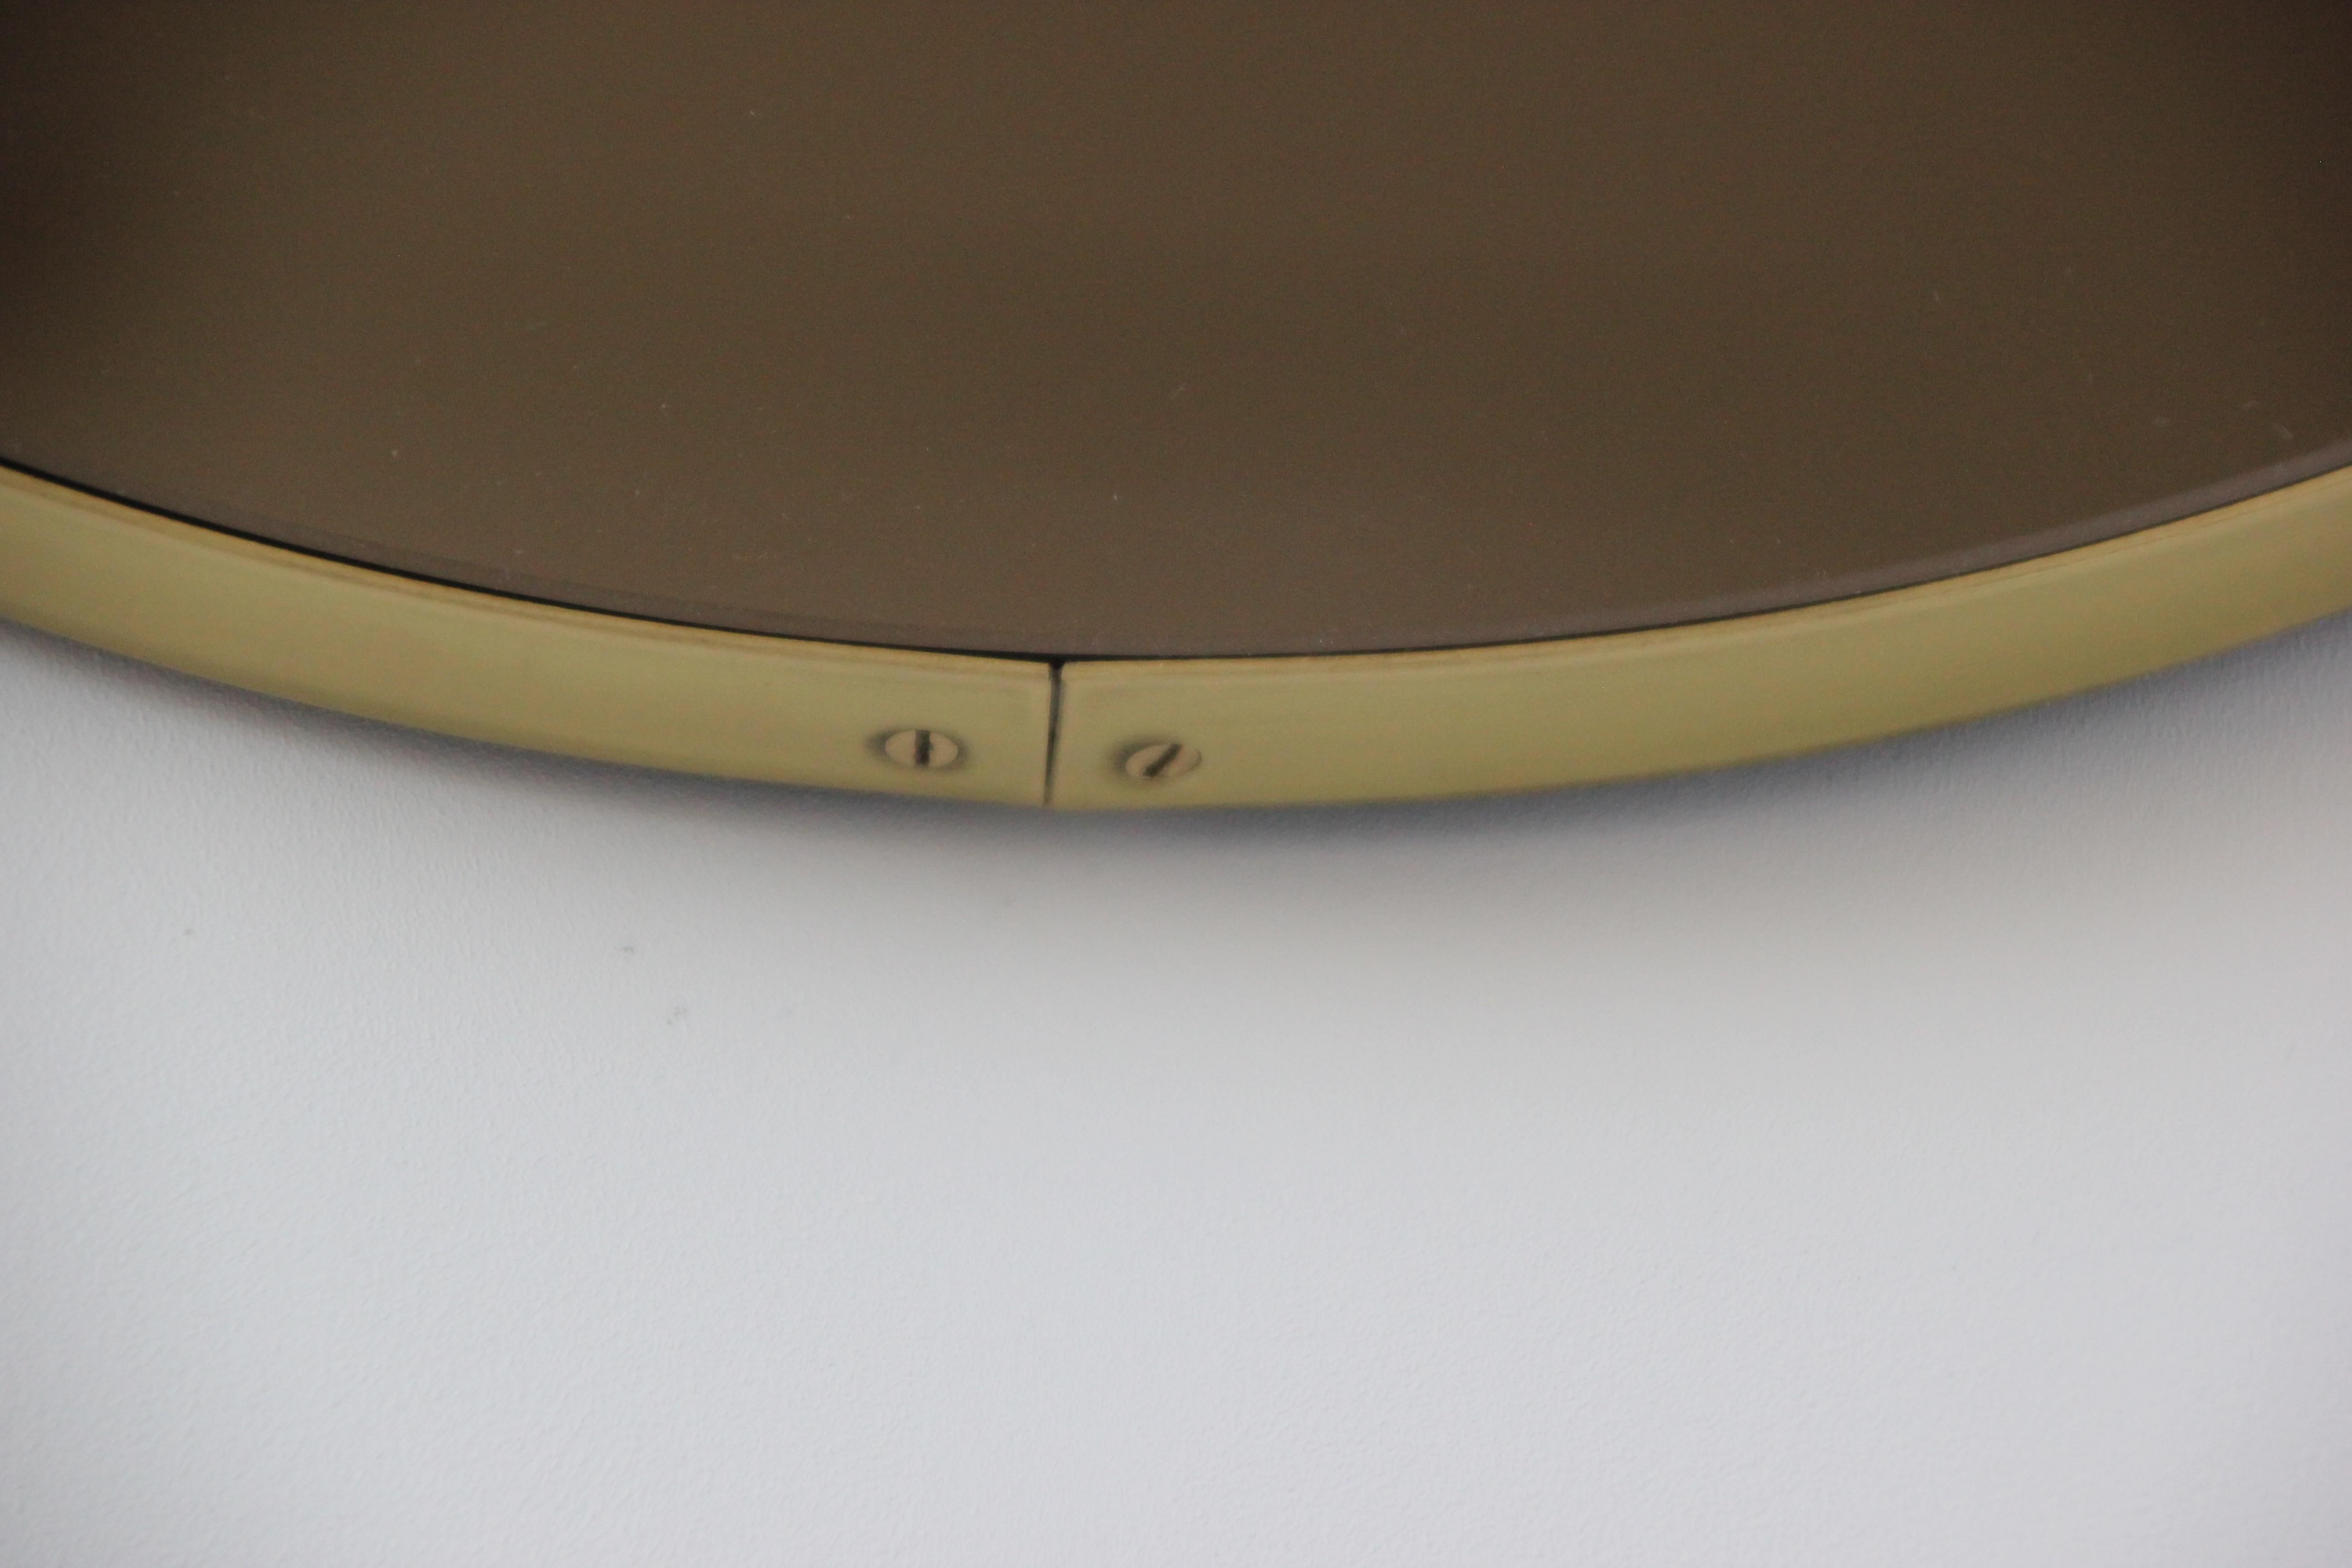 Orbis Bronze Tinted Contemporary Round Mirror Brass Frame, Regular In New Condition For Sale In London, GB